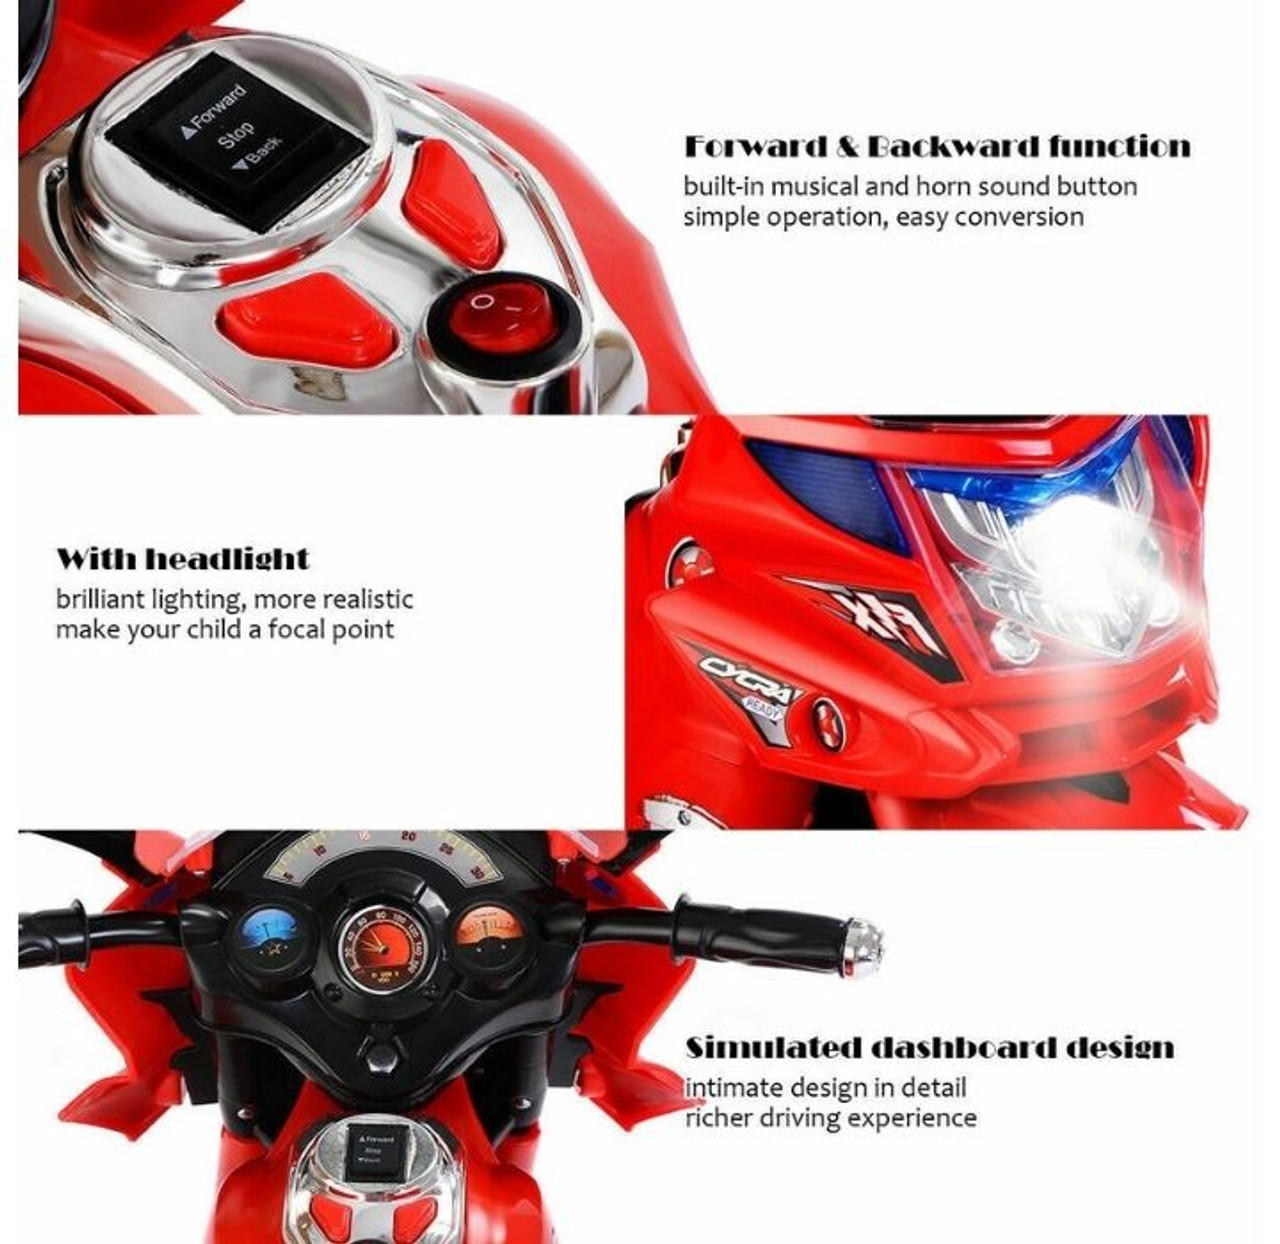 Electric 6V 3 Wheel Kids' Ride-On Motorcycle  product image